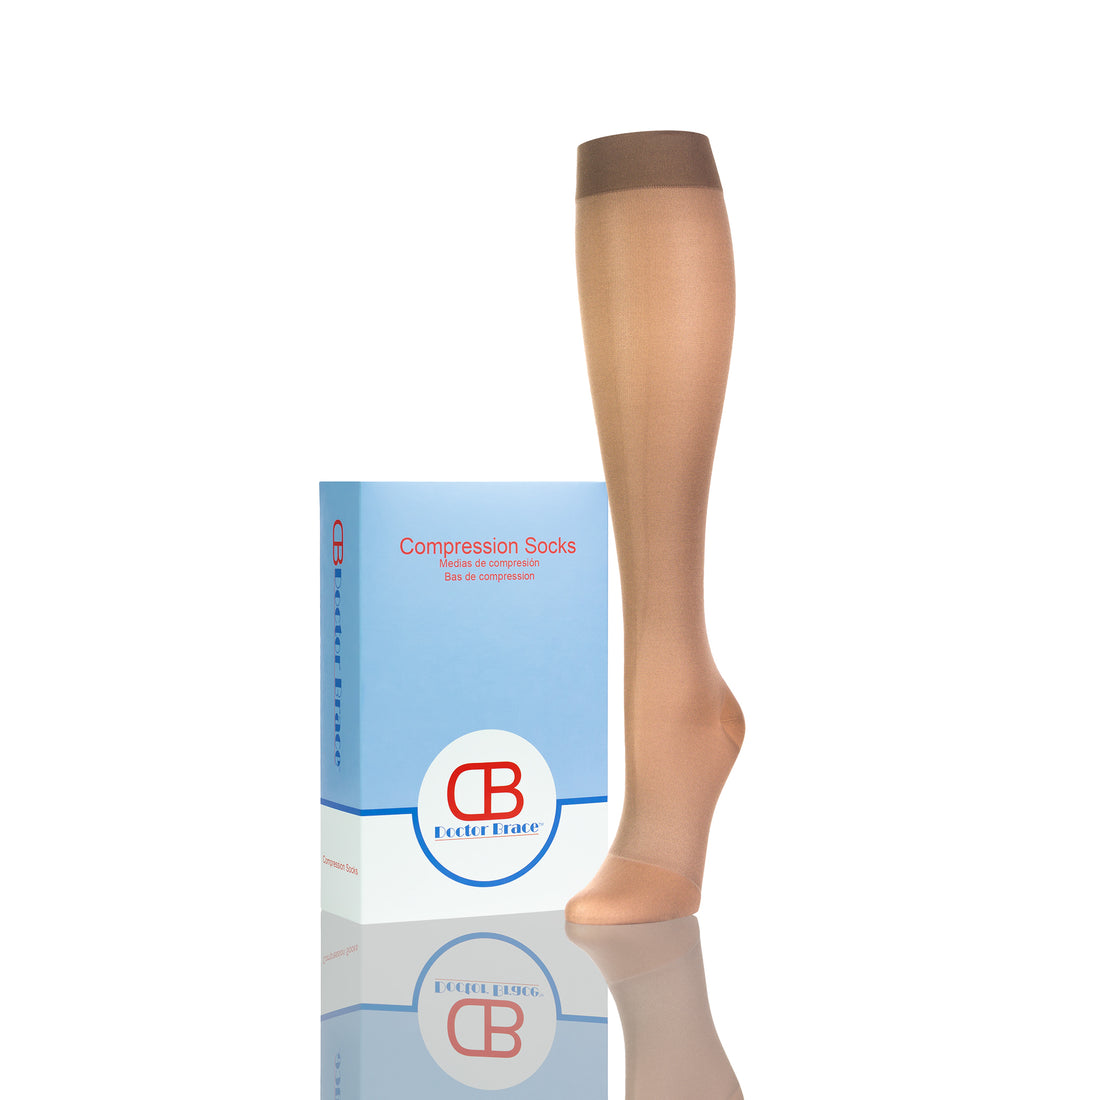 Made in USA - Sheer Compression Socks for Women Circulation 15-20mmHg -  Compression Knee High Stockings with Open Toe for Arthritis, Swelling